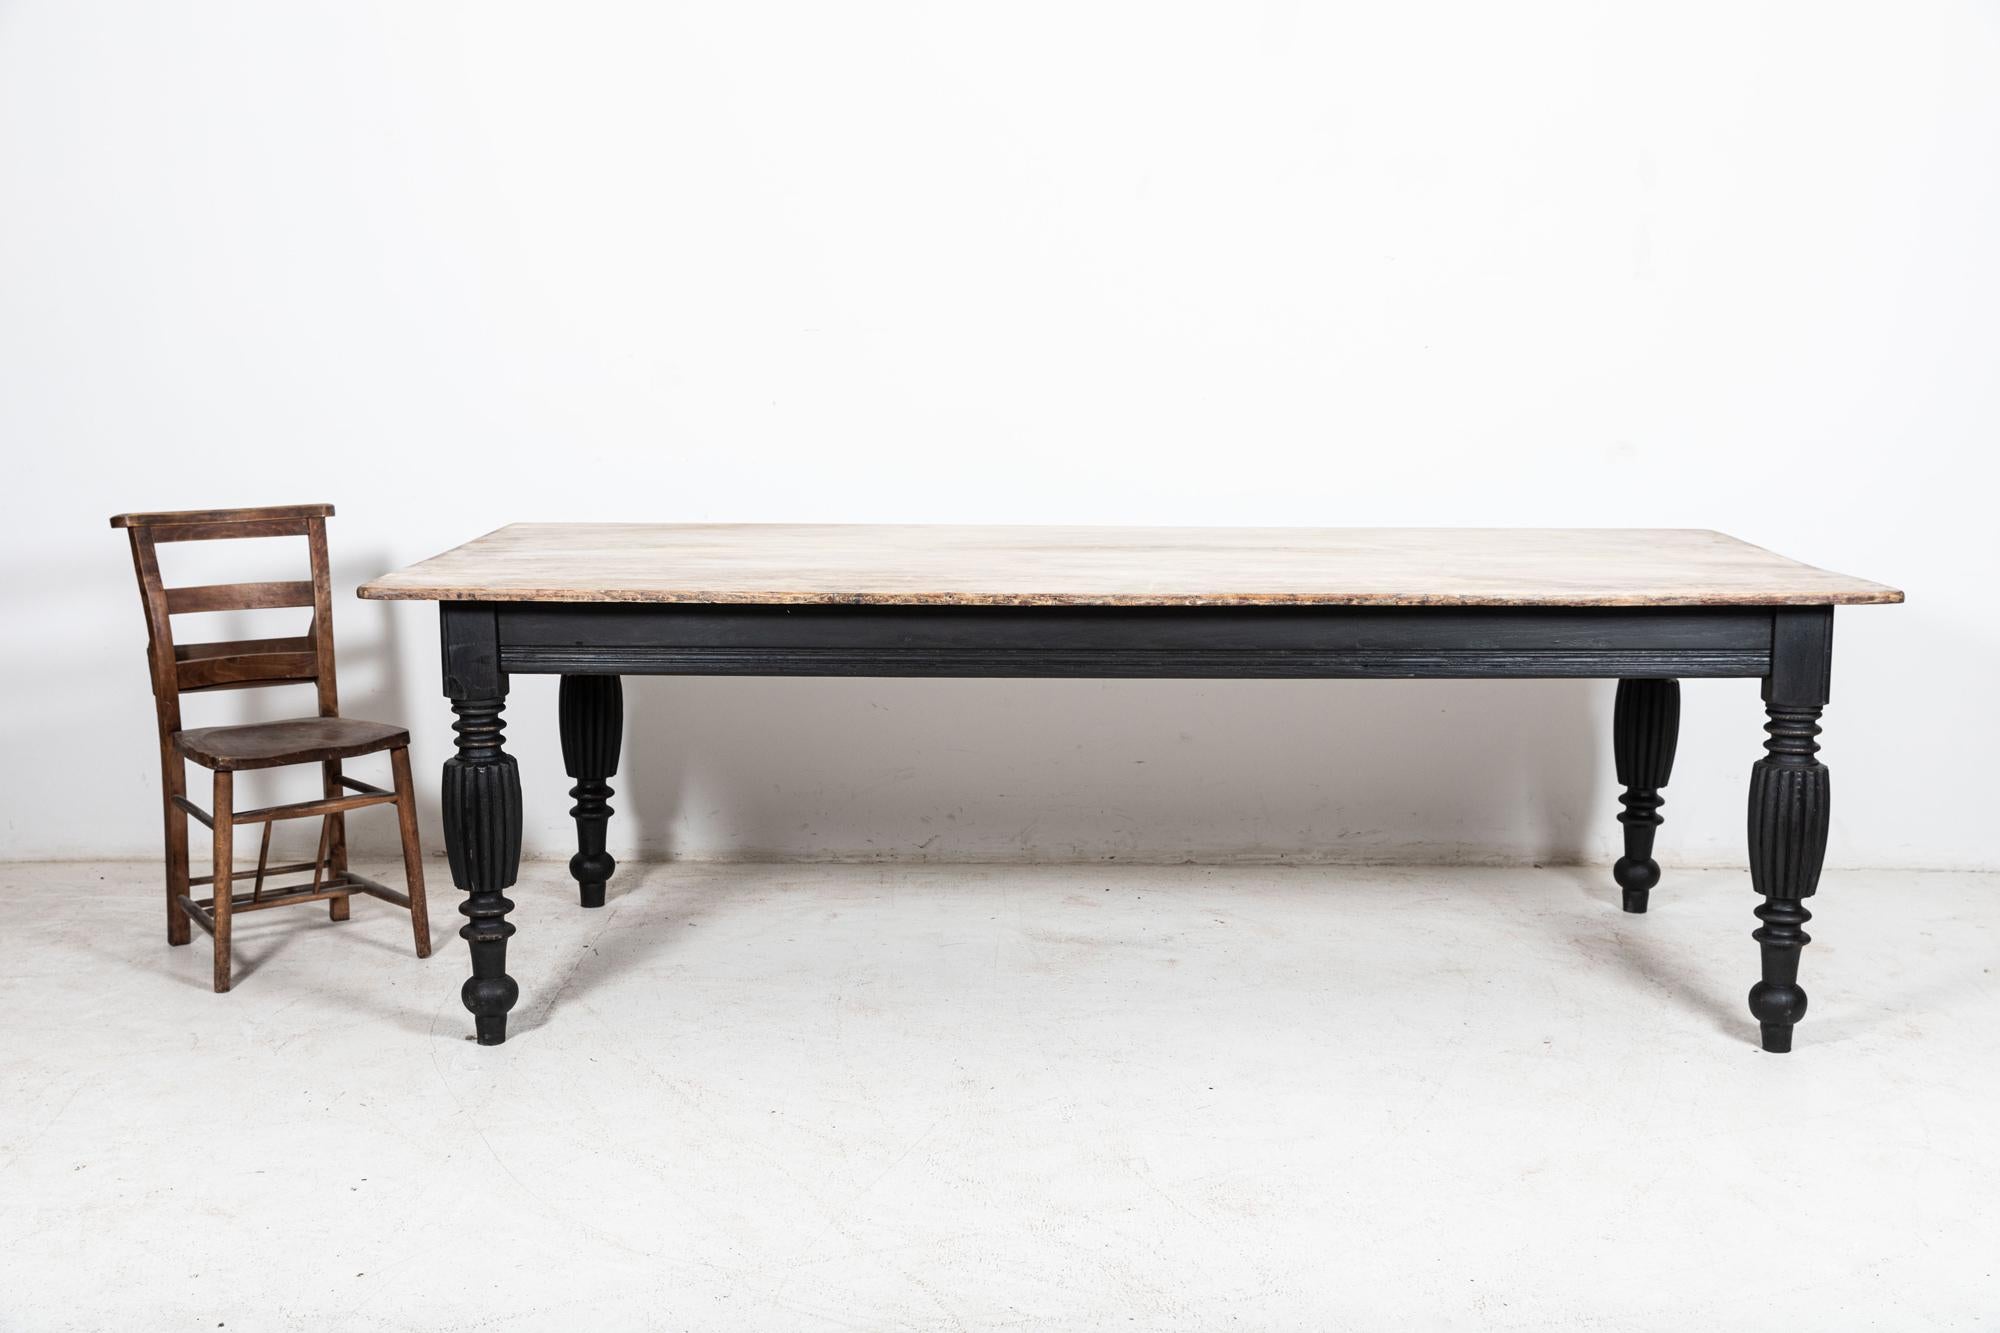 Circa 1940

Large English Ebonised Oak dining table with Bleached scrub top.

(Legs can be unbolted and detached from the top)

Measures: W243 x D112 x H78cm.

 